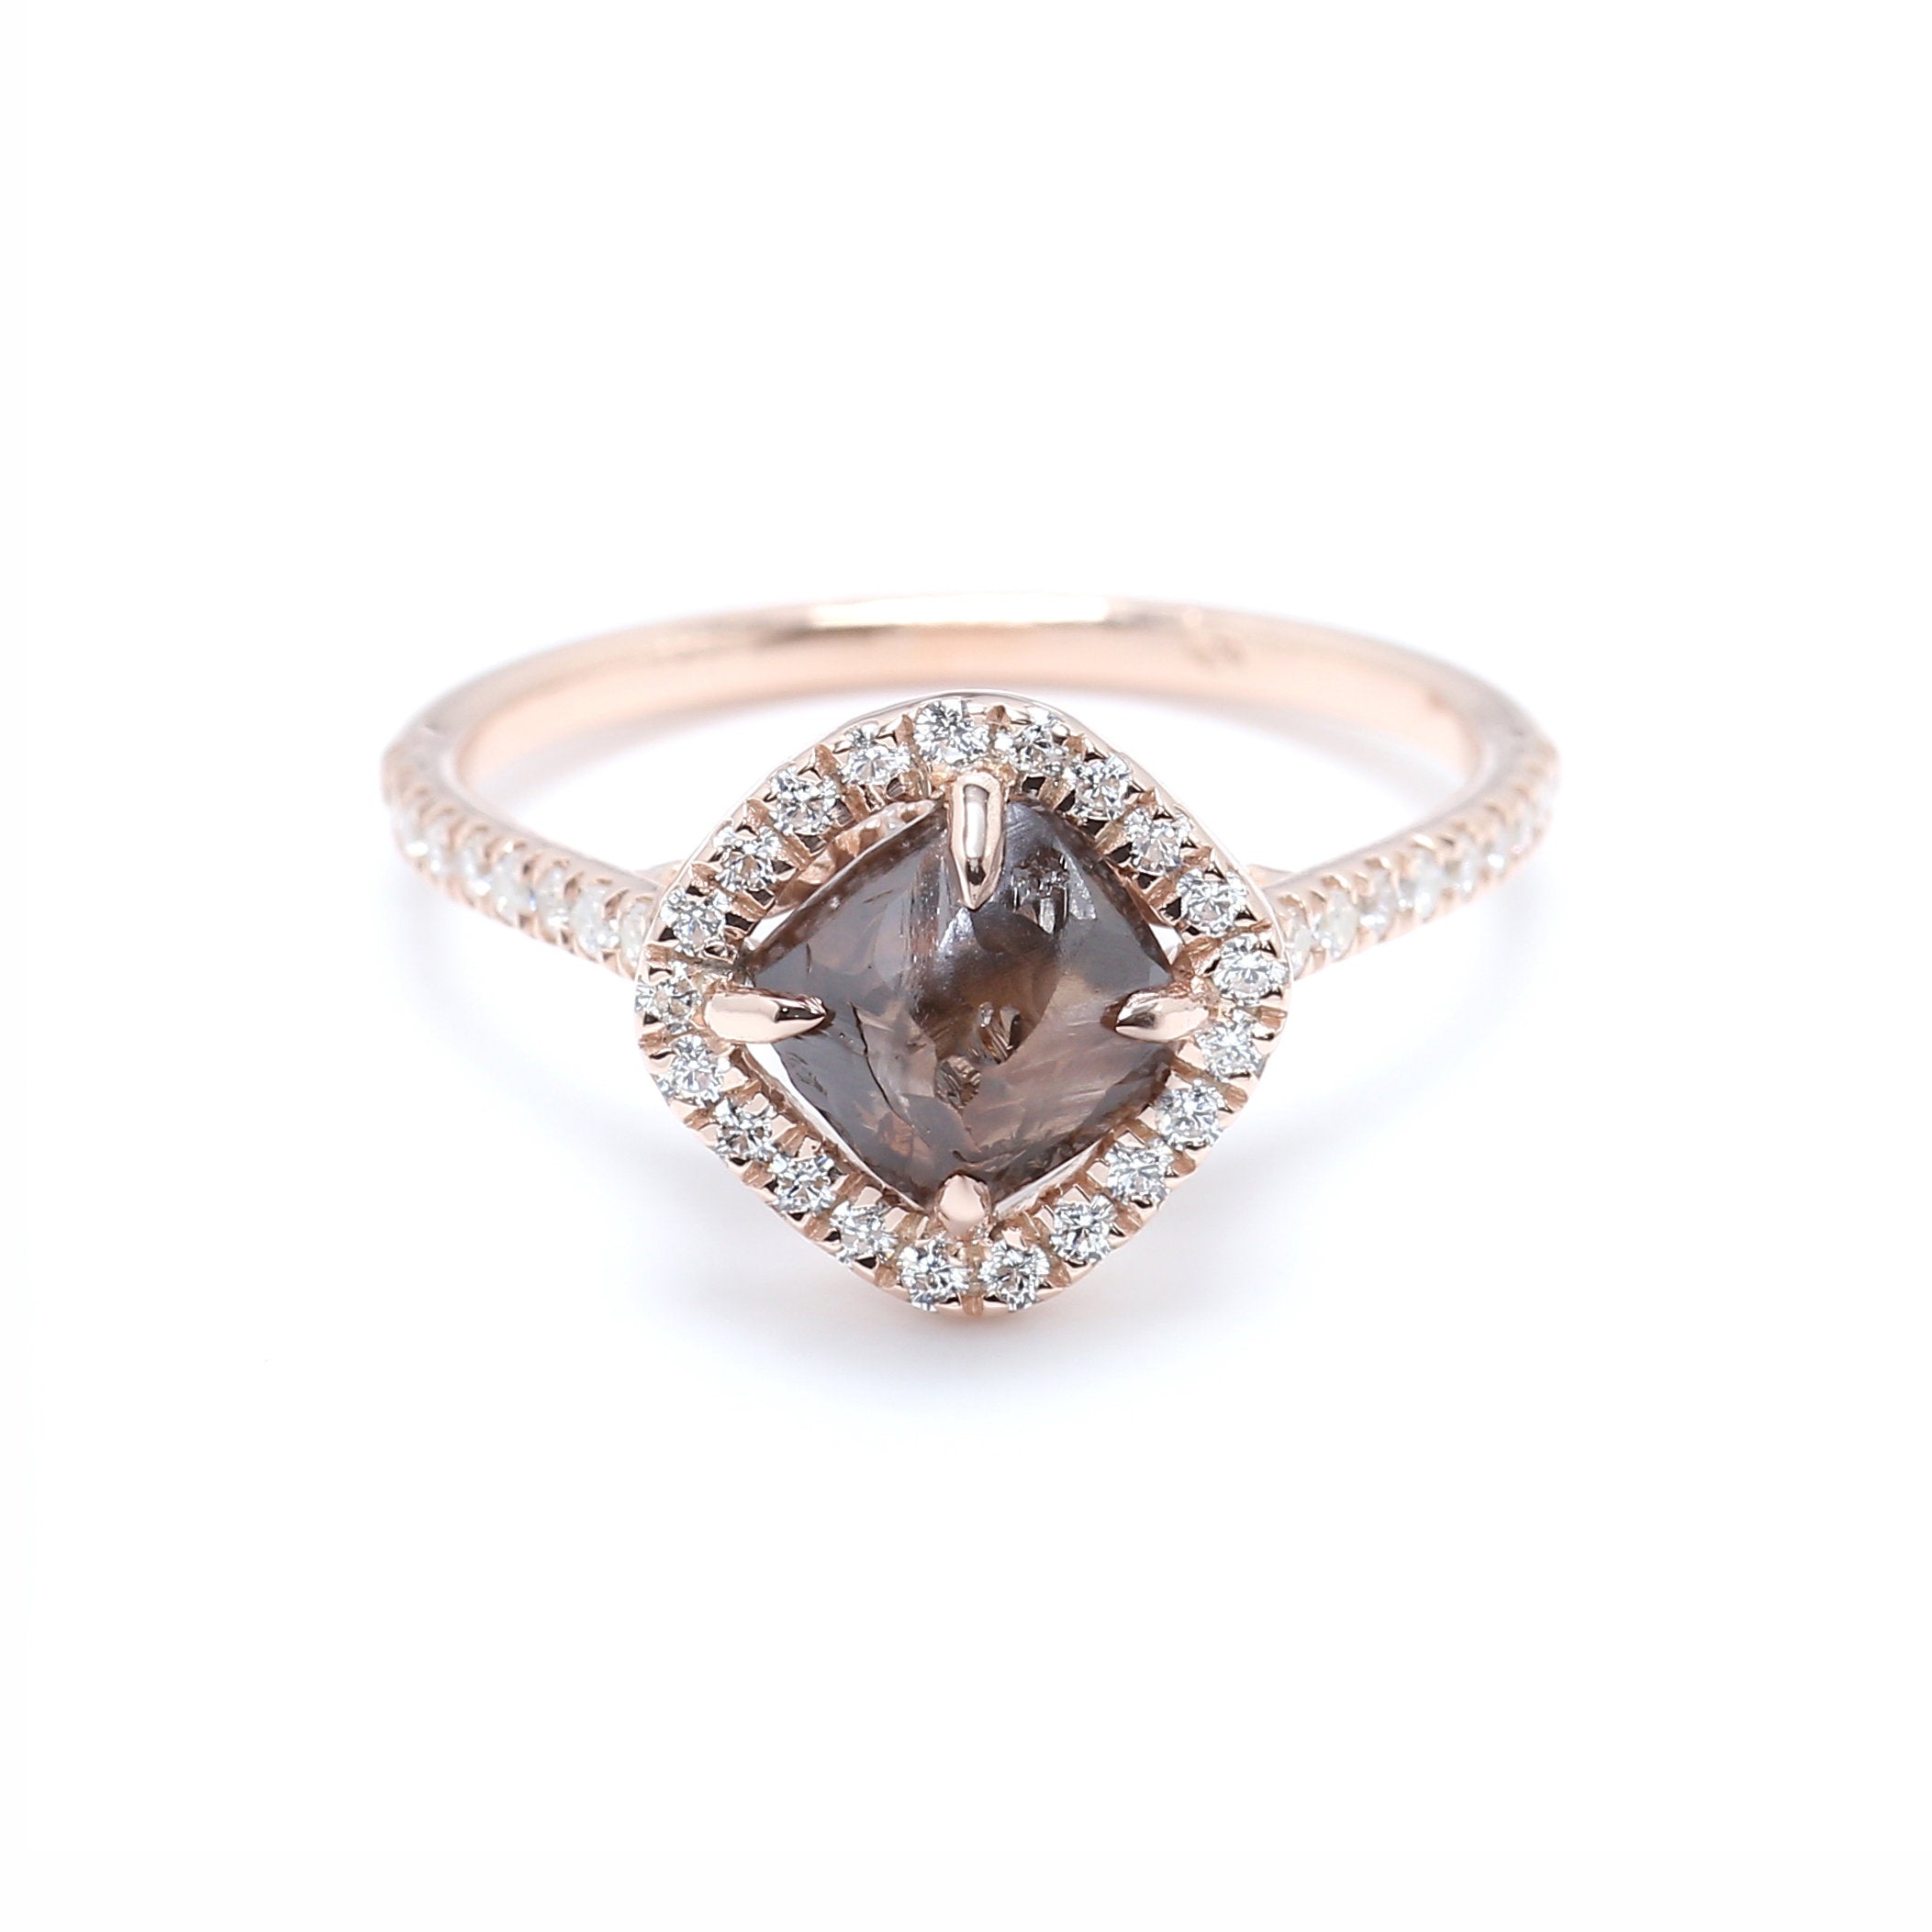 Rough Brown Color Diamond Ring 2.09 Ct 6.30 MM Rough Diamond Ring 14K Solid Rose Gold Silver Engagement Ring Gift For Her QL3103